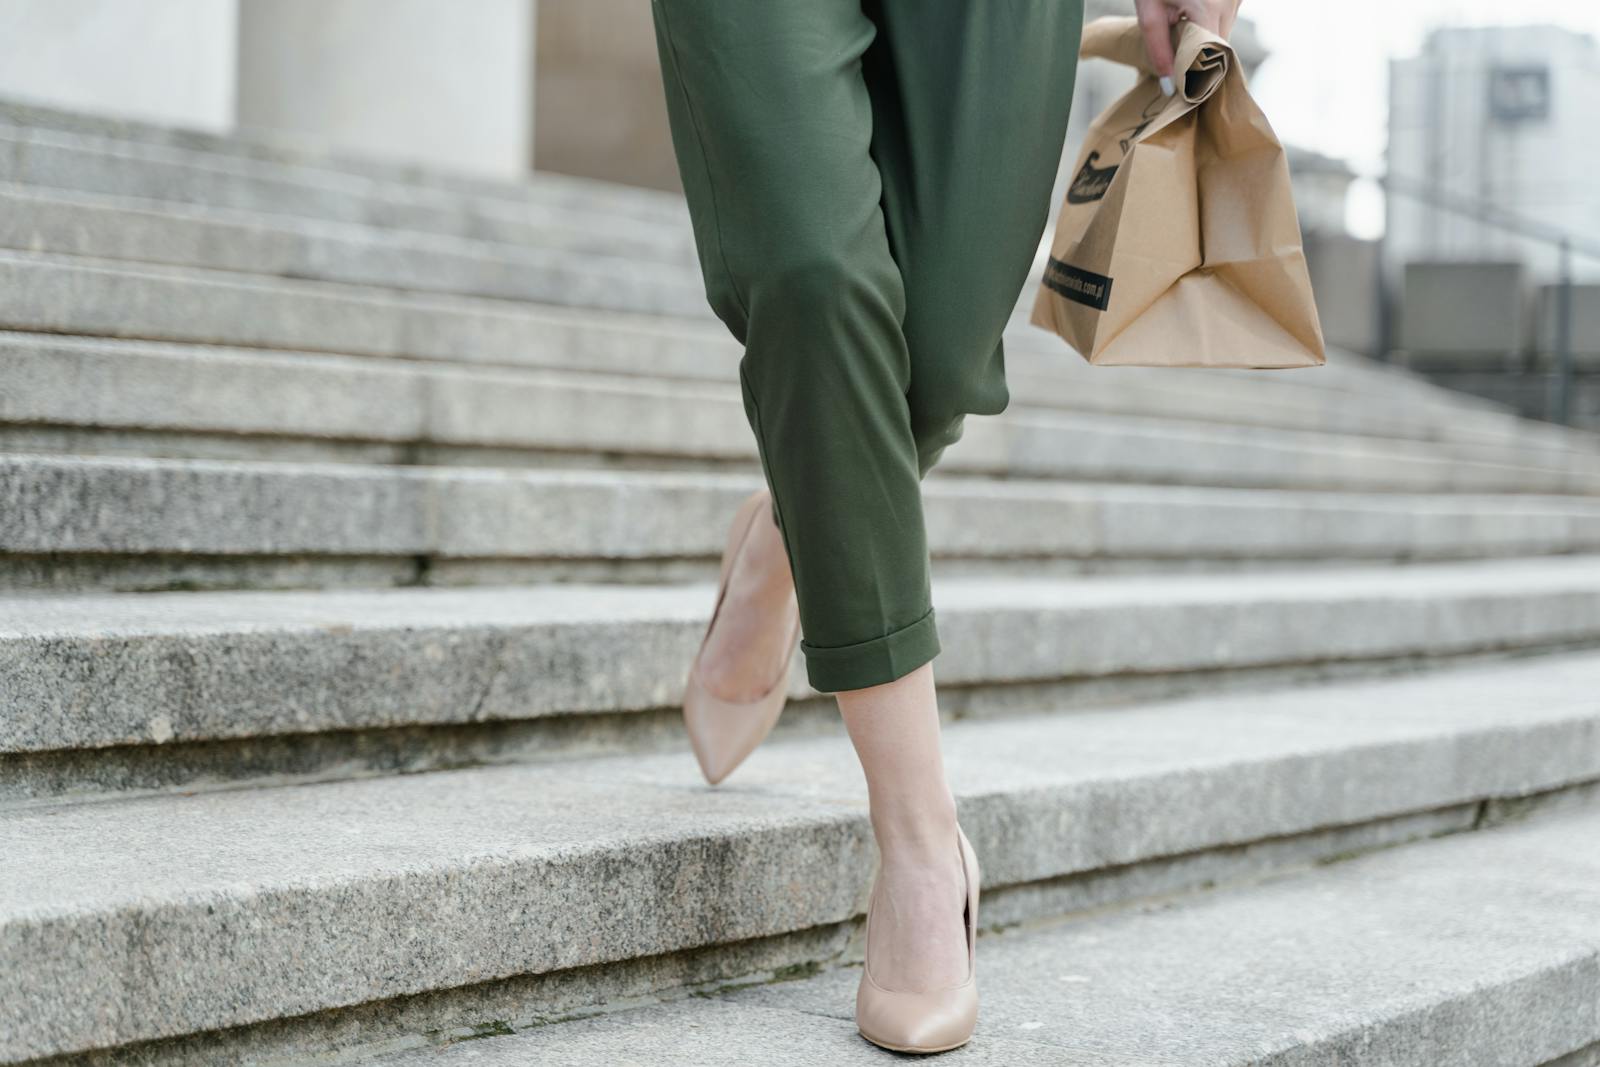 Woman in Beige High Heels and Green Pants Walking on Concrete Stairs